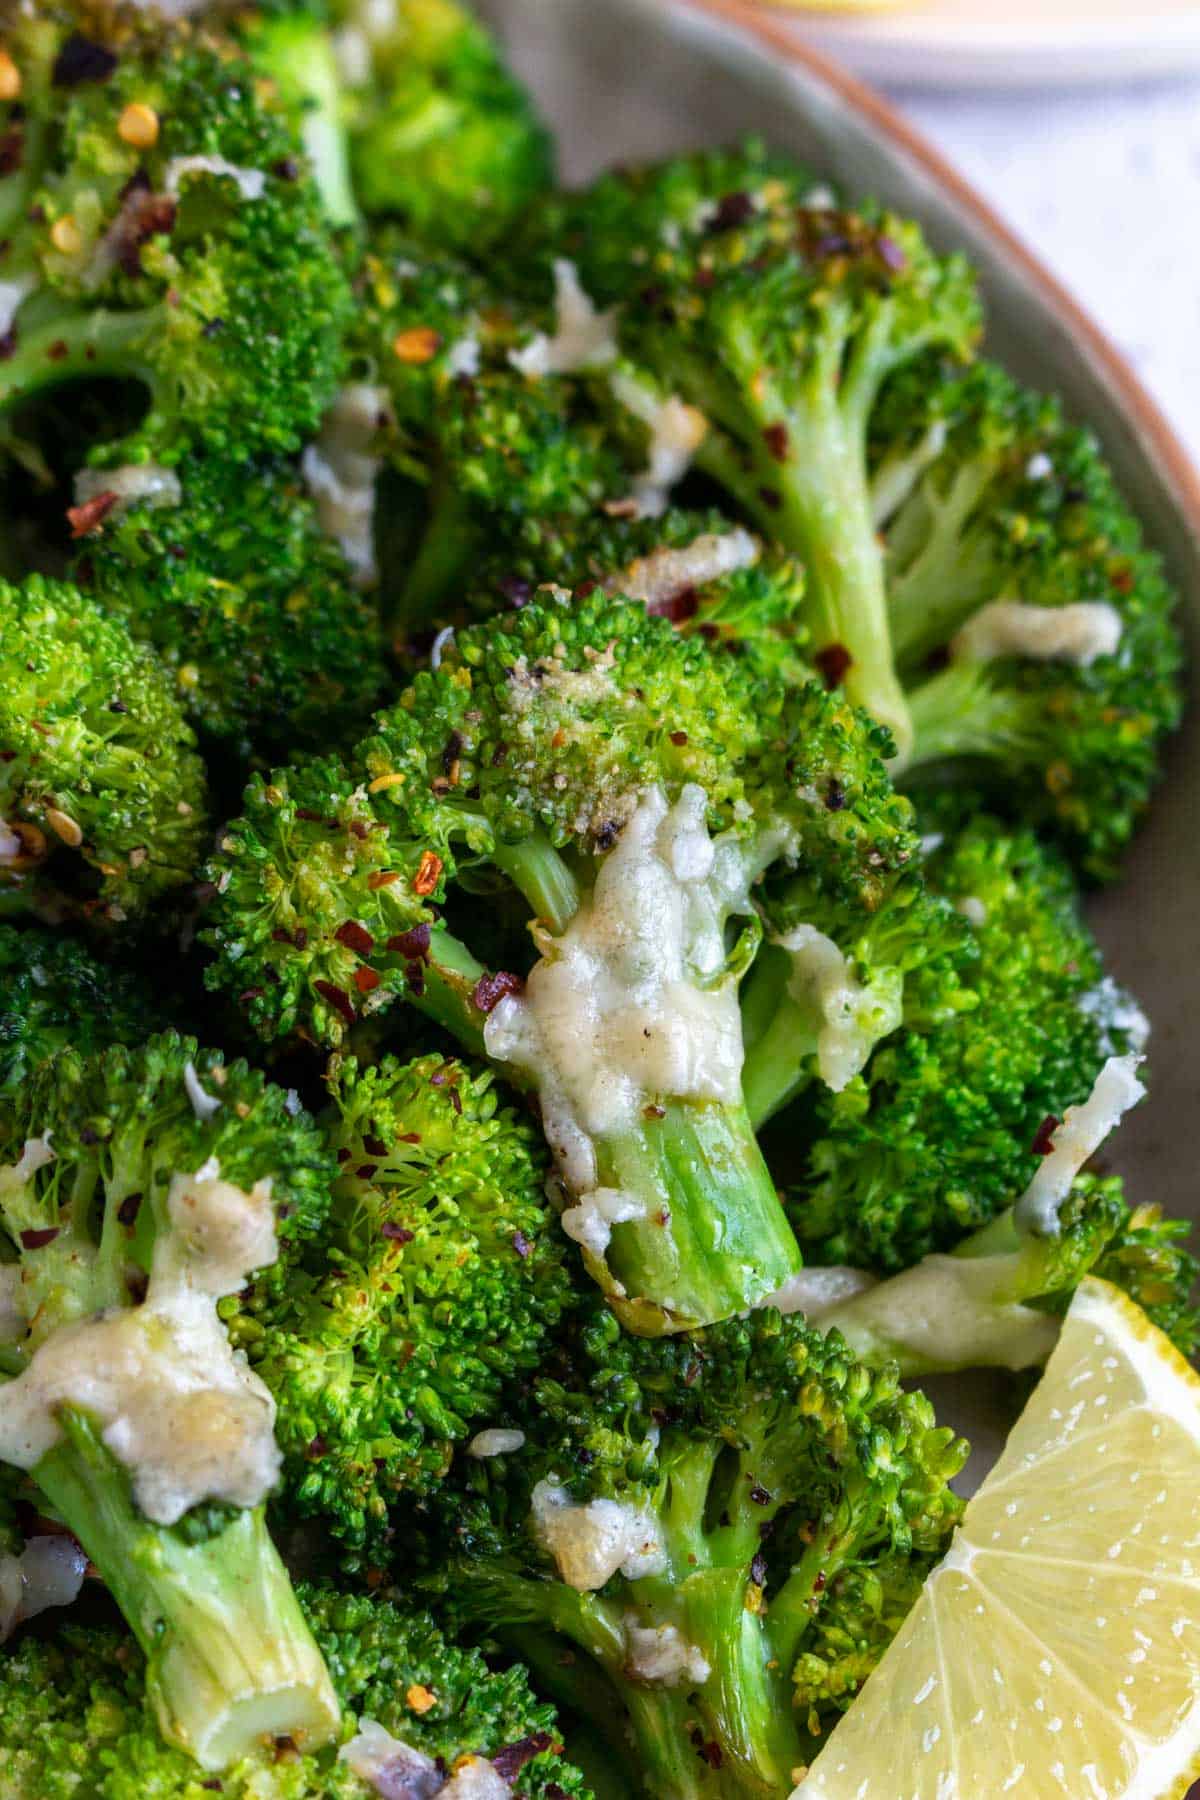 A close up view of smashed broccoli with red pepper flakes and melted parmesan and a lemon wedge.